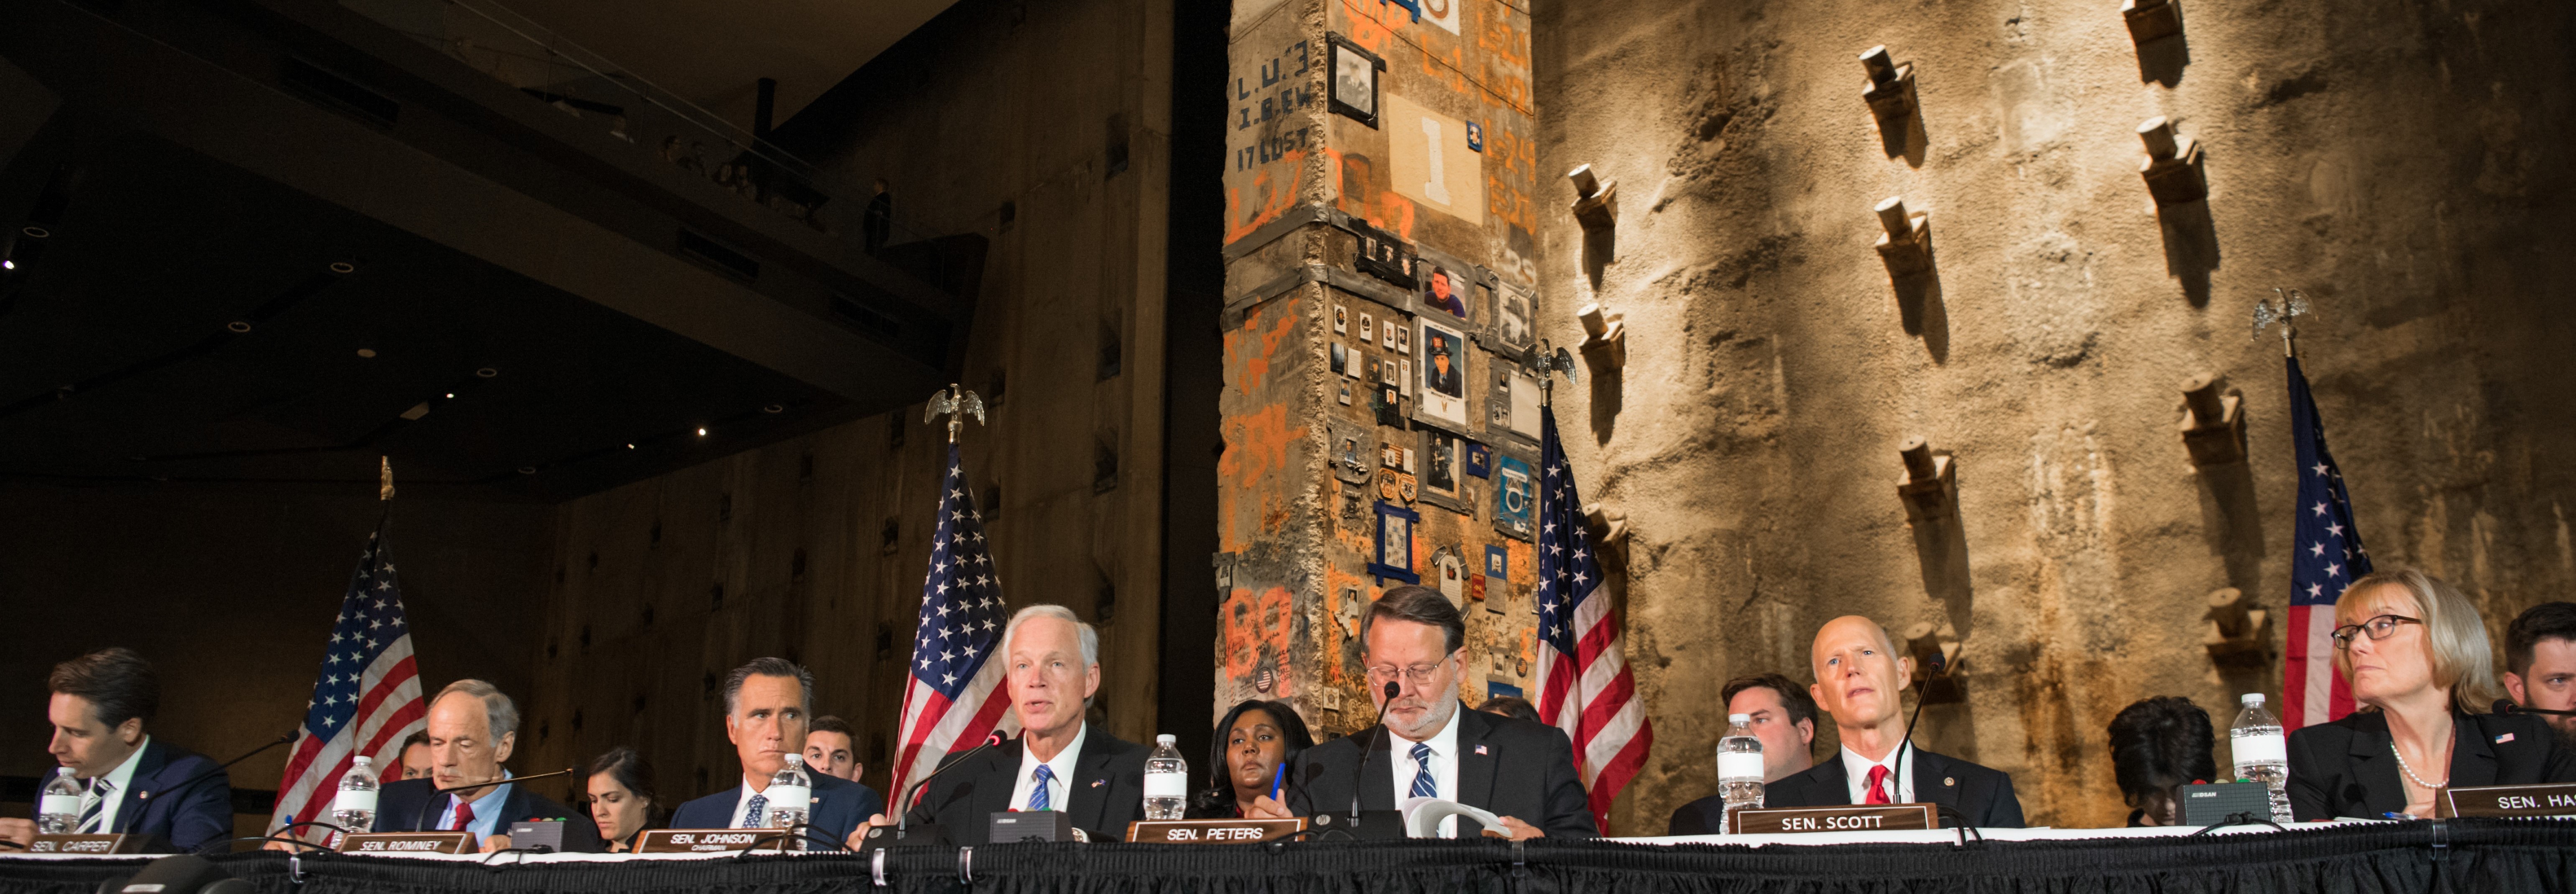 HSGAC Hearing at 9/11 Memorial & Museum in New York Reflects on National Security Challenges